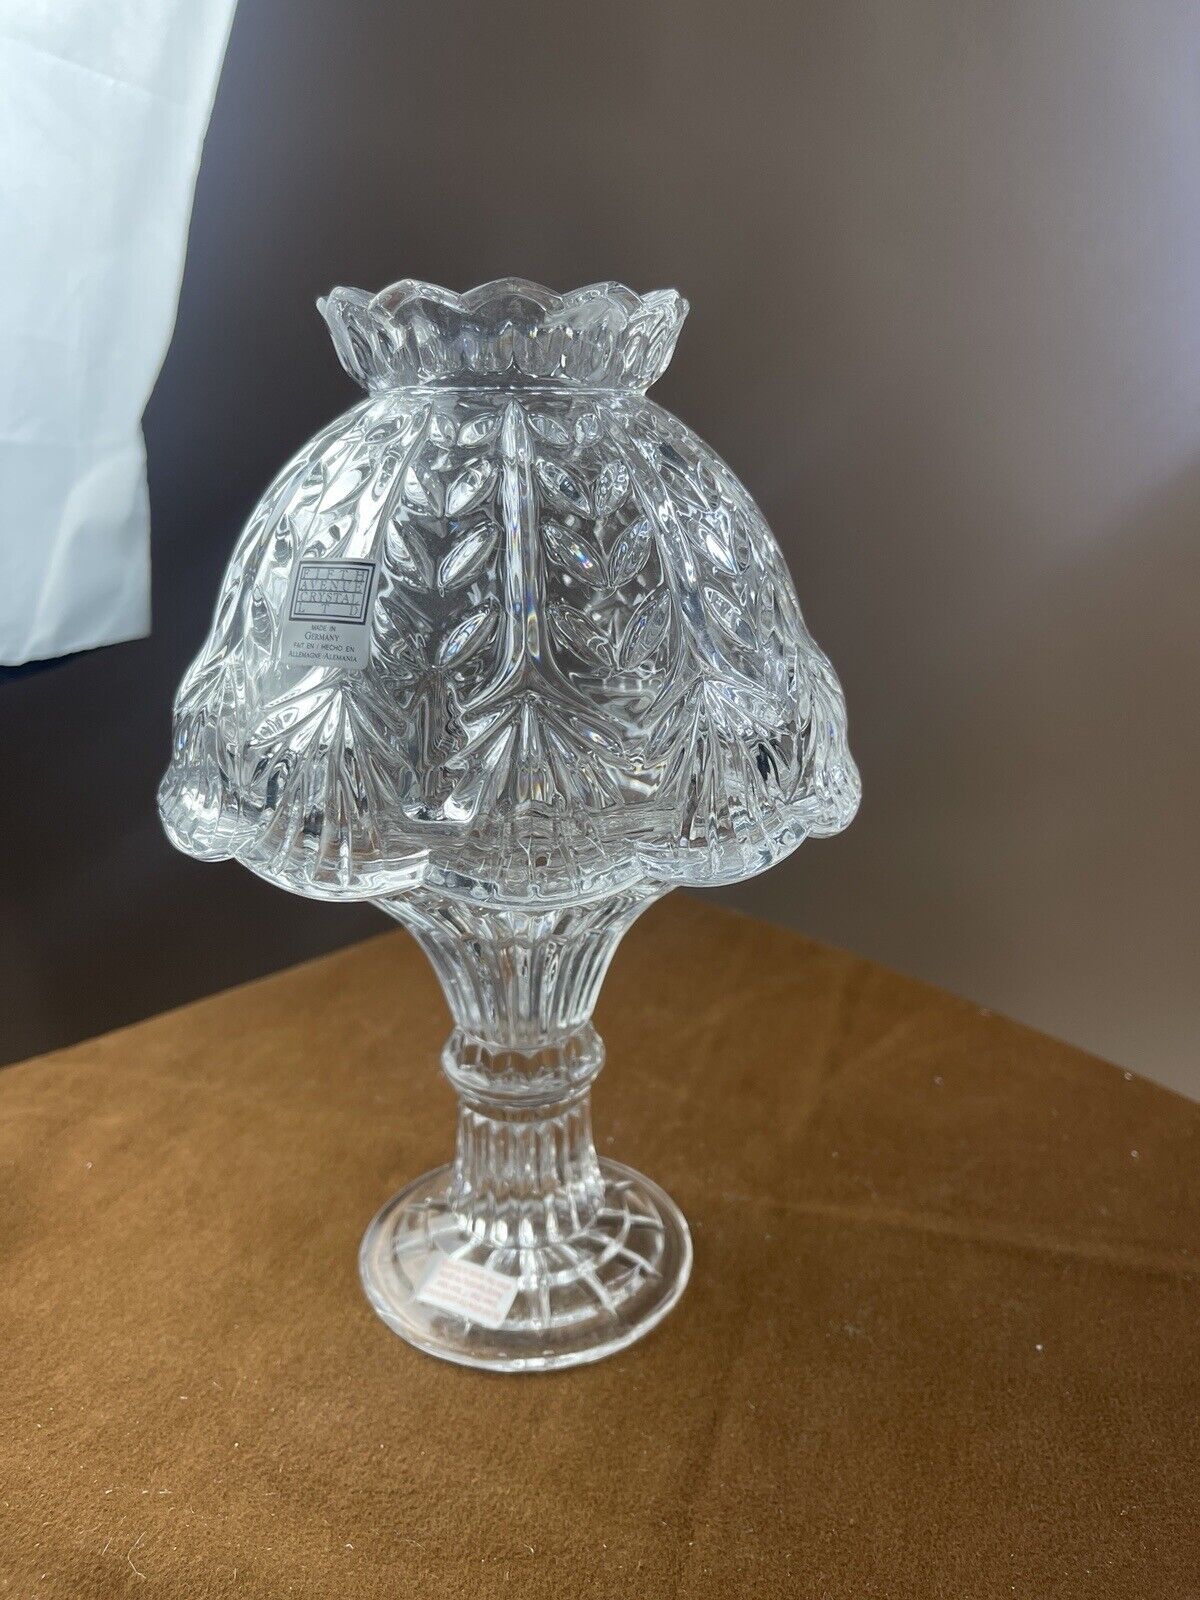 Vintage Fifth Avenue Crystal Portico Fairy Lamp Candle Holder Light Germany 9.5”